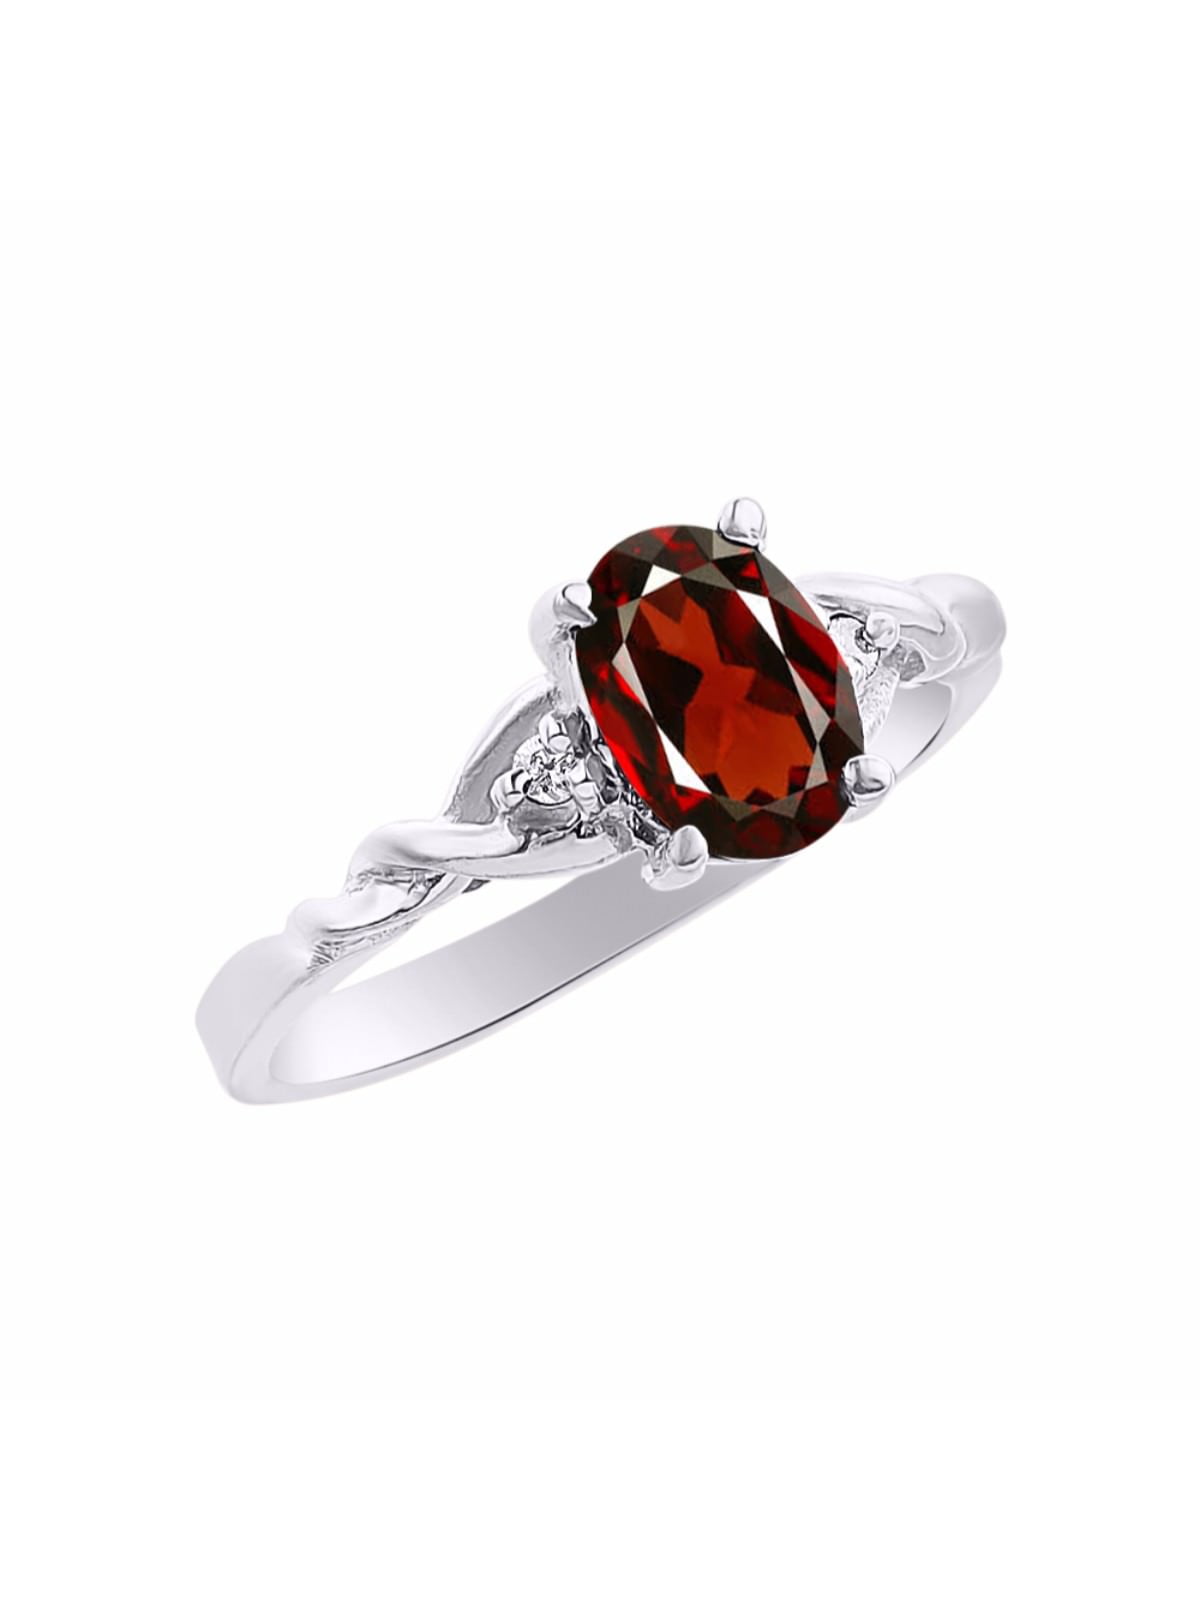 Diamond & Garnet Ring set in Yellow Gold Plated Silver 